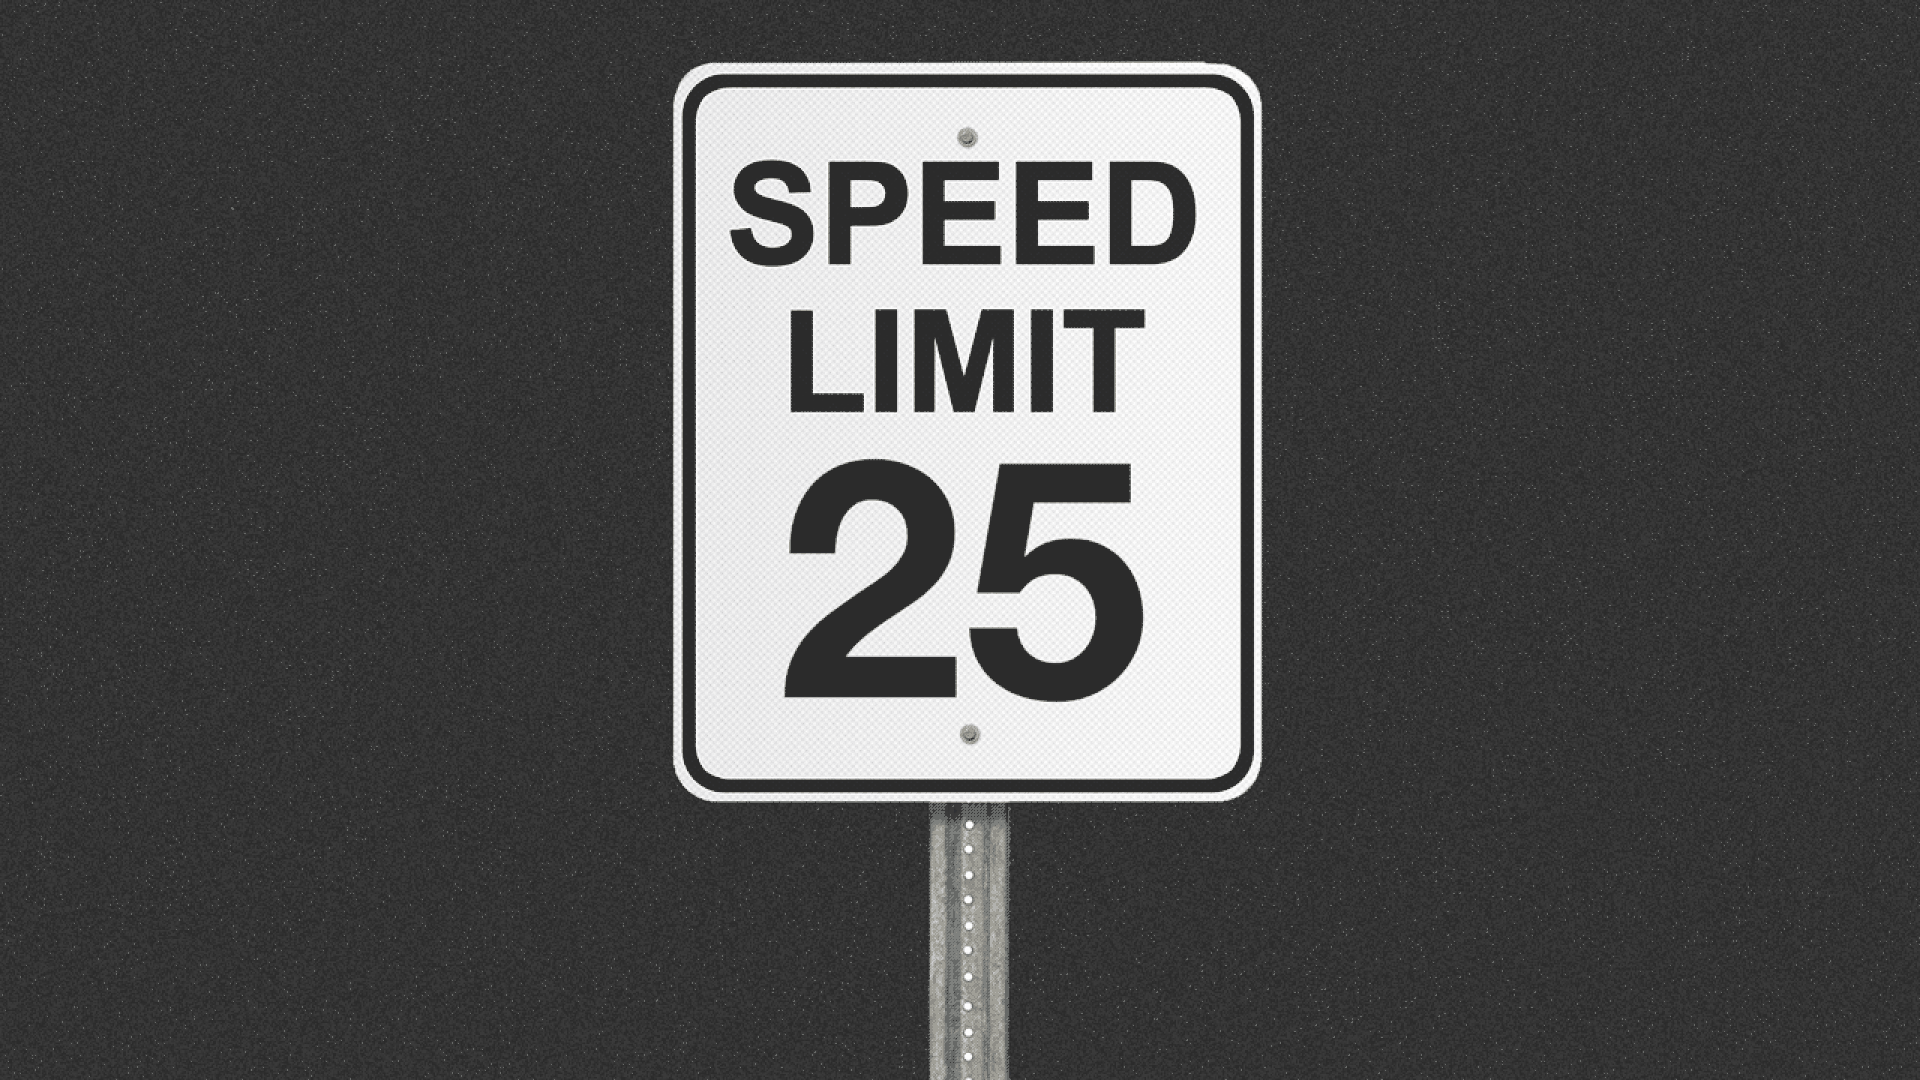 Denver's plan to — finally — change speed limit signs